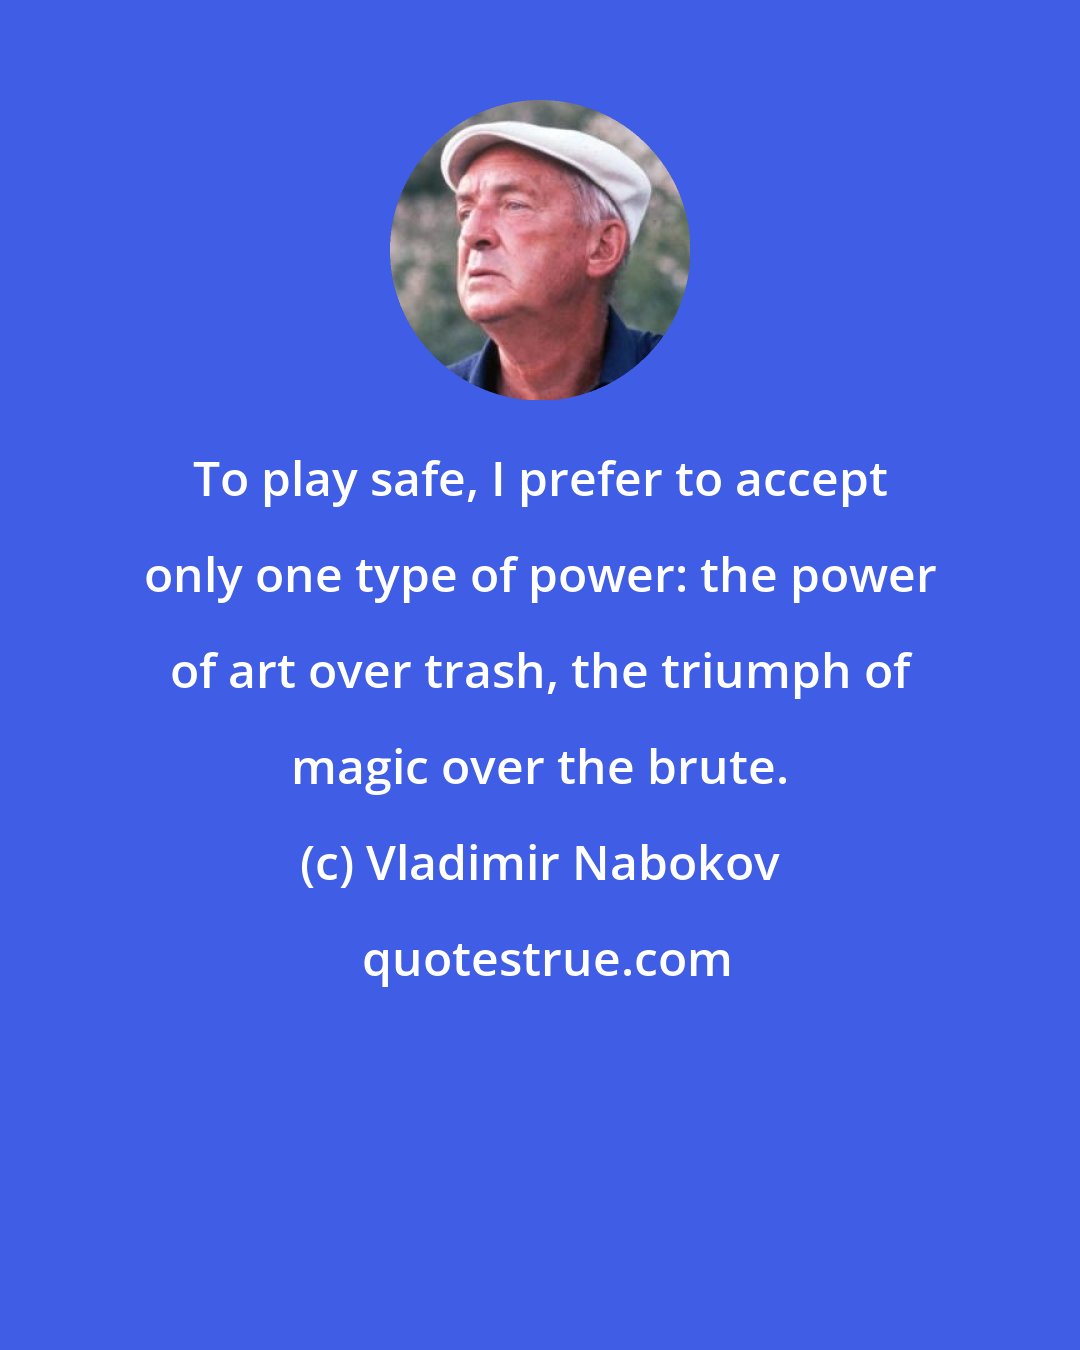 Vladimir Nabokov: To play safe, I prefer to accept only one type of power: the power of art over trash, the triumph of magic over the brute.